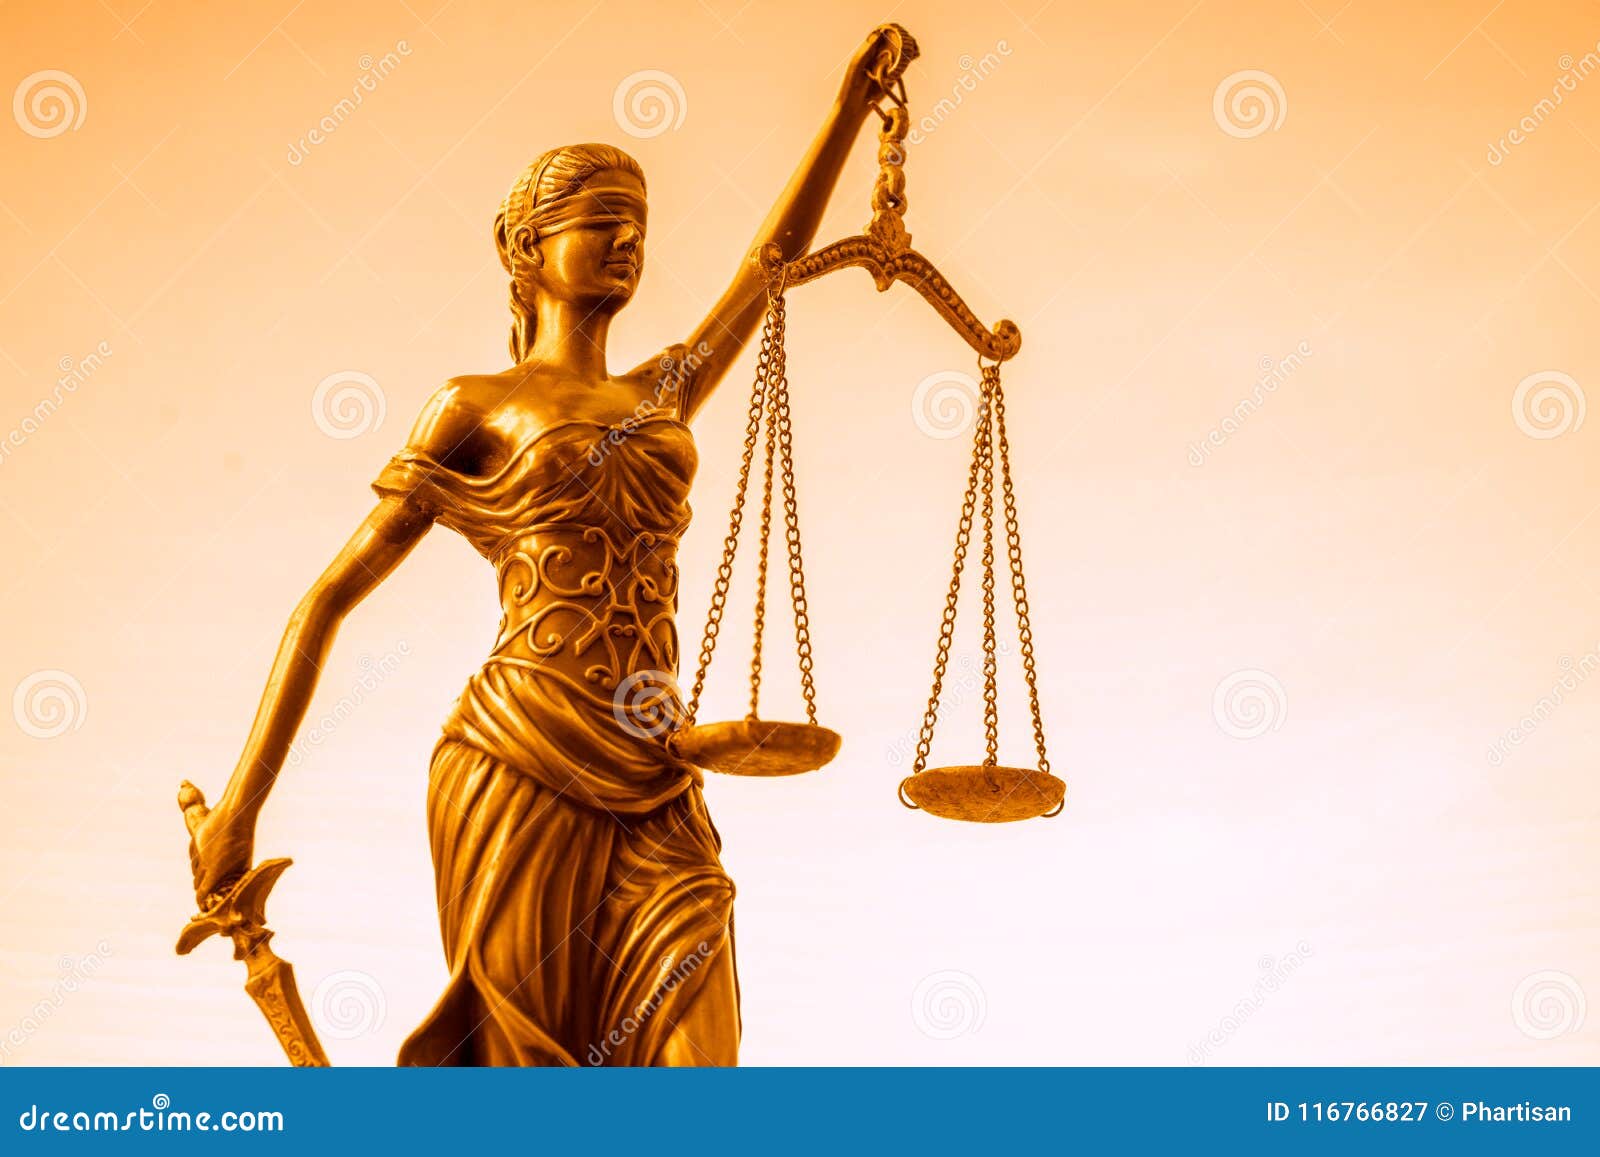 legal law concept image, scales of justice, golden light.